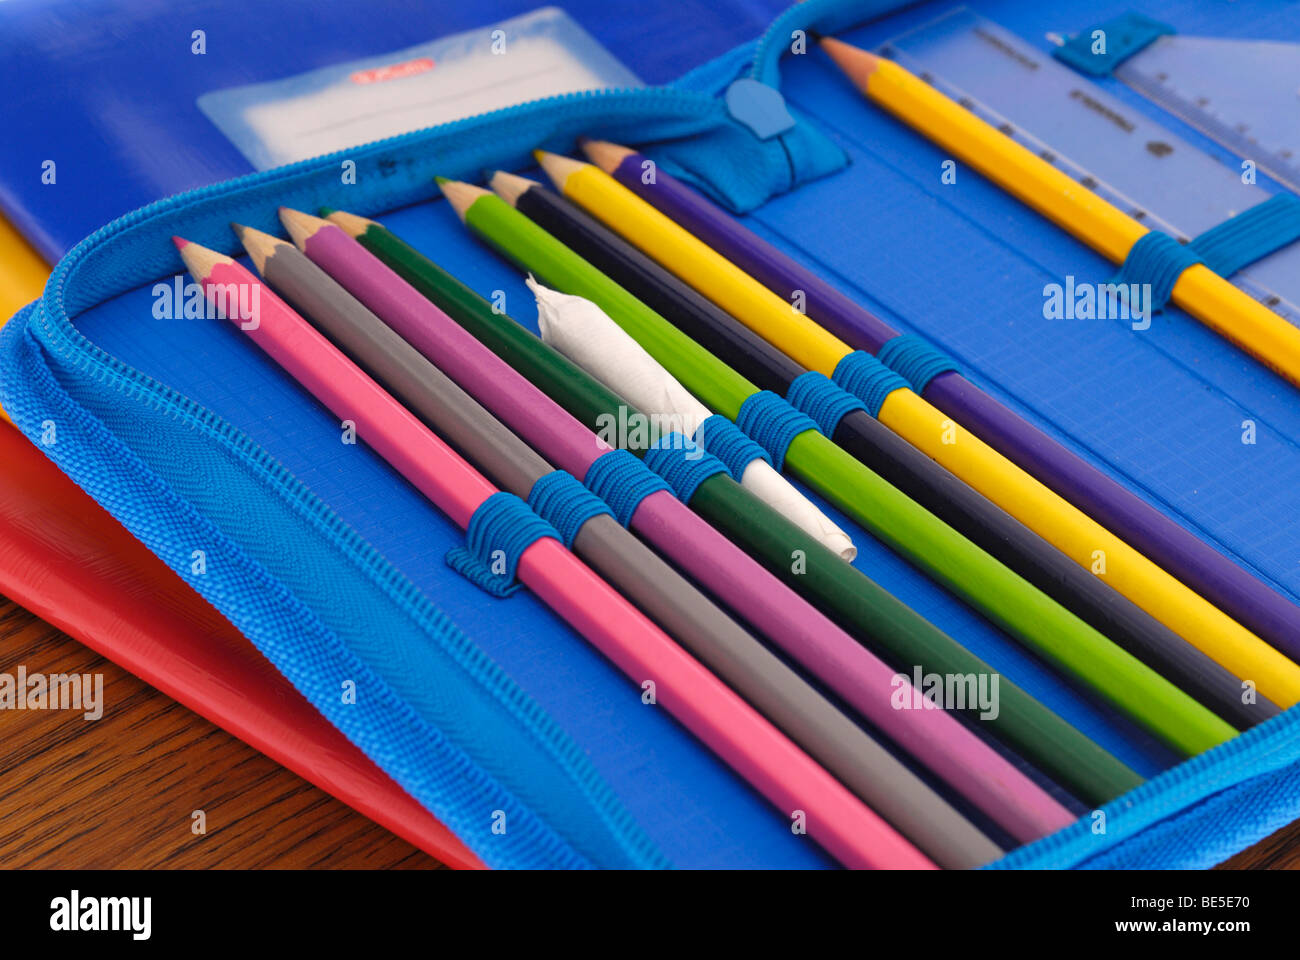 Joint in a pencil case, symbolic image for drug use among adolescents Stock Photo